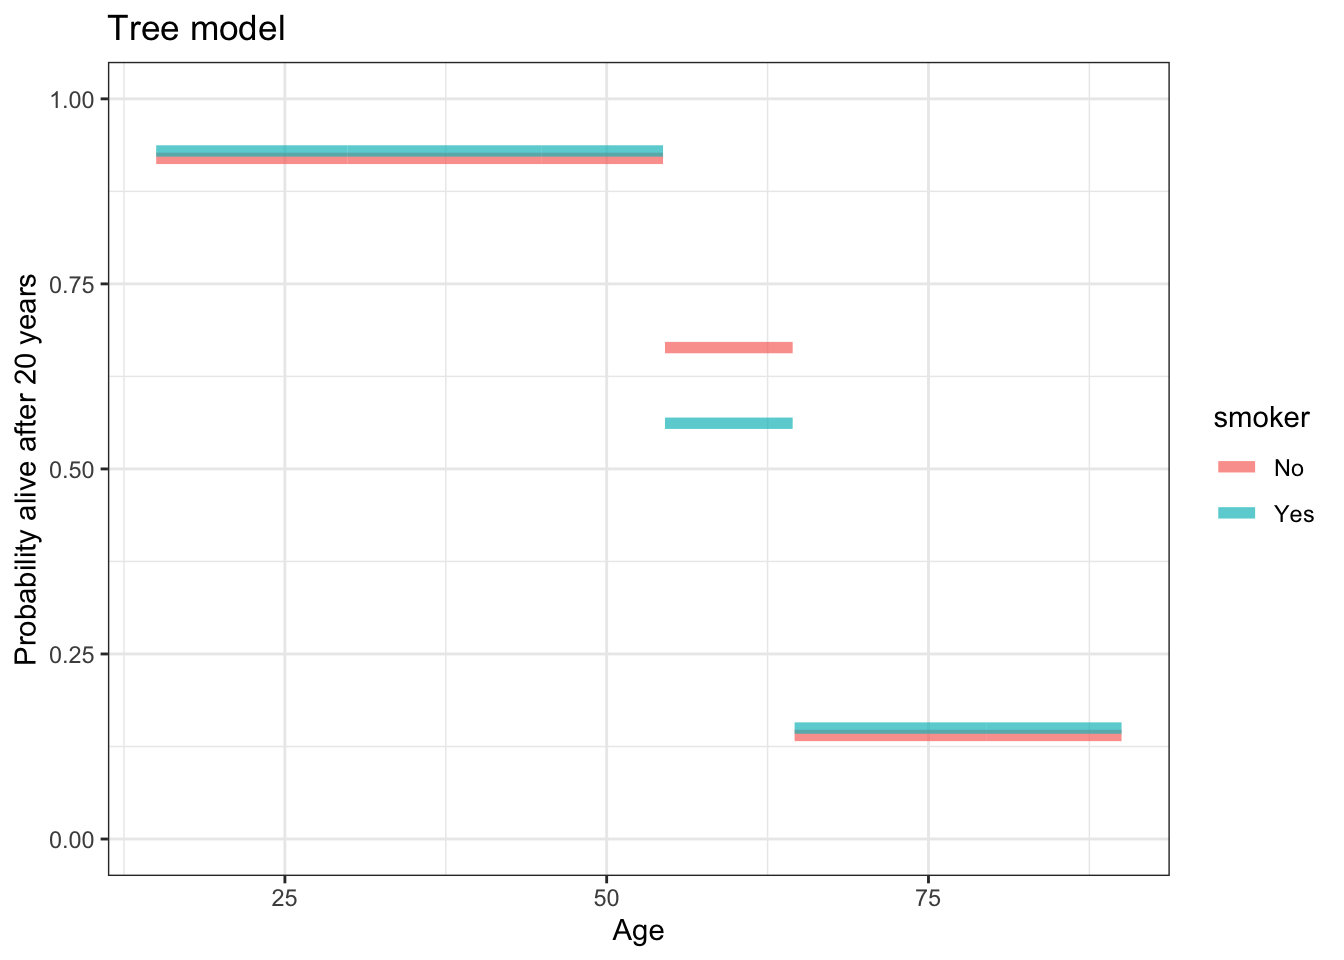 The graph of the tree model outcome ~ smoker + age. For those younger than 55 and those older than 64, the probability of being alive is the same for smokers and non-smokers.